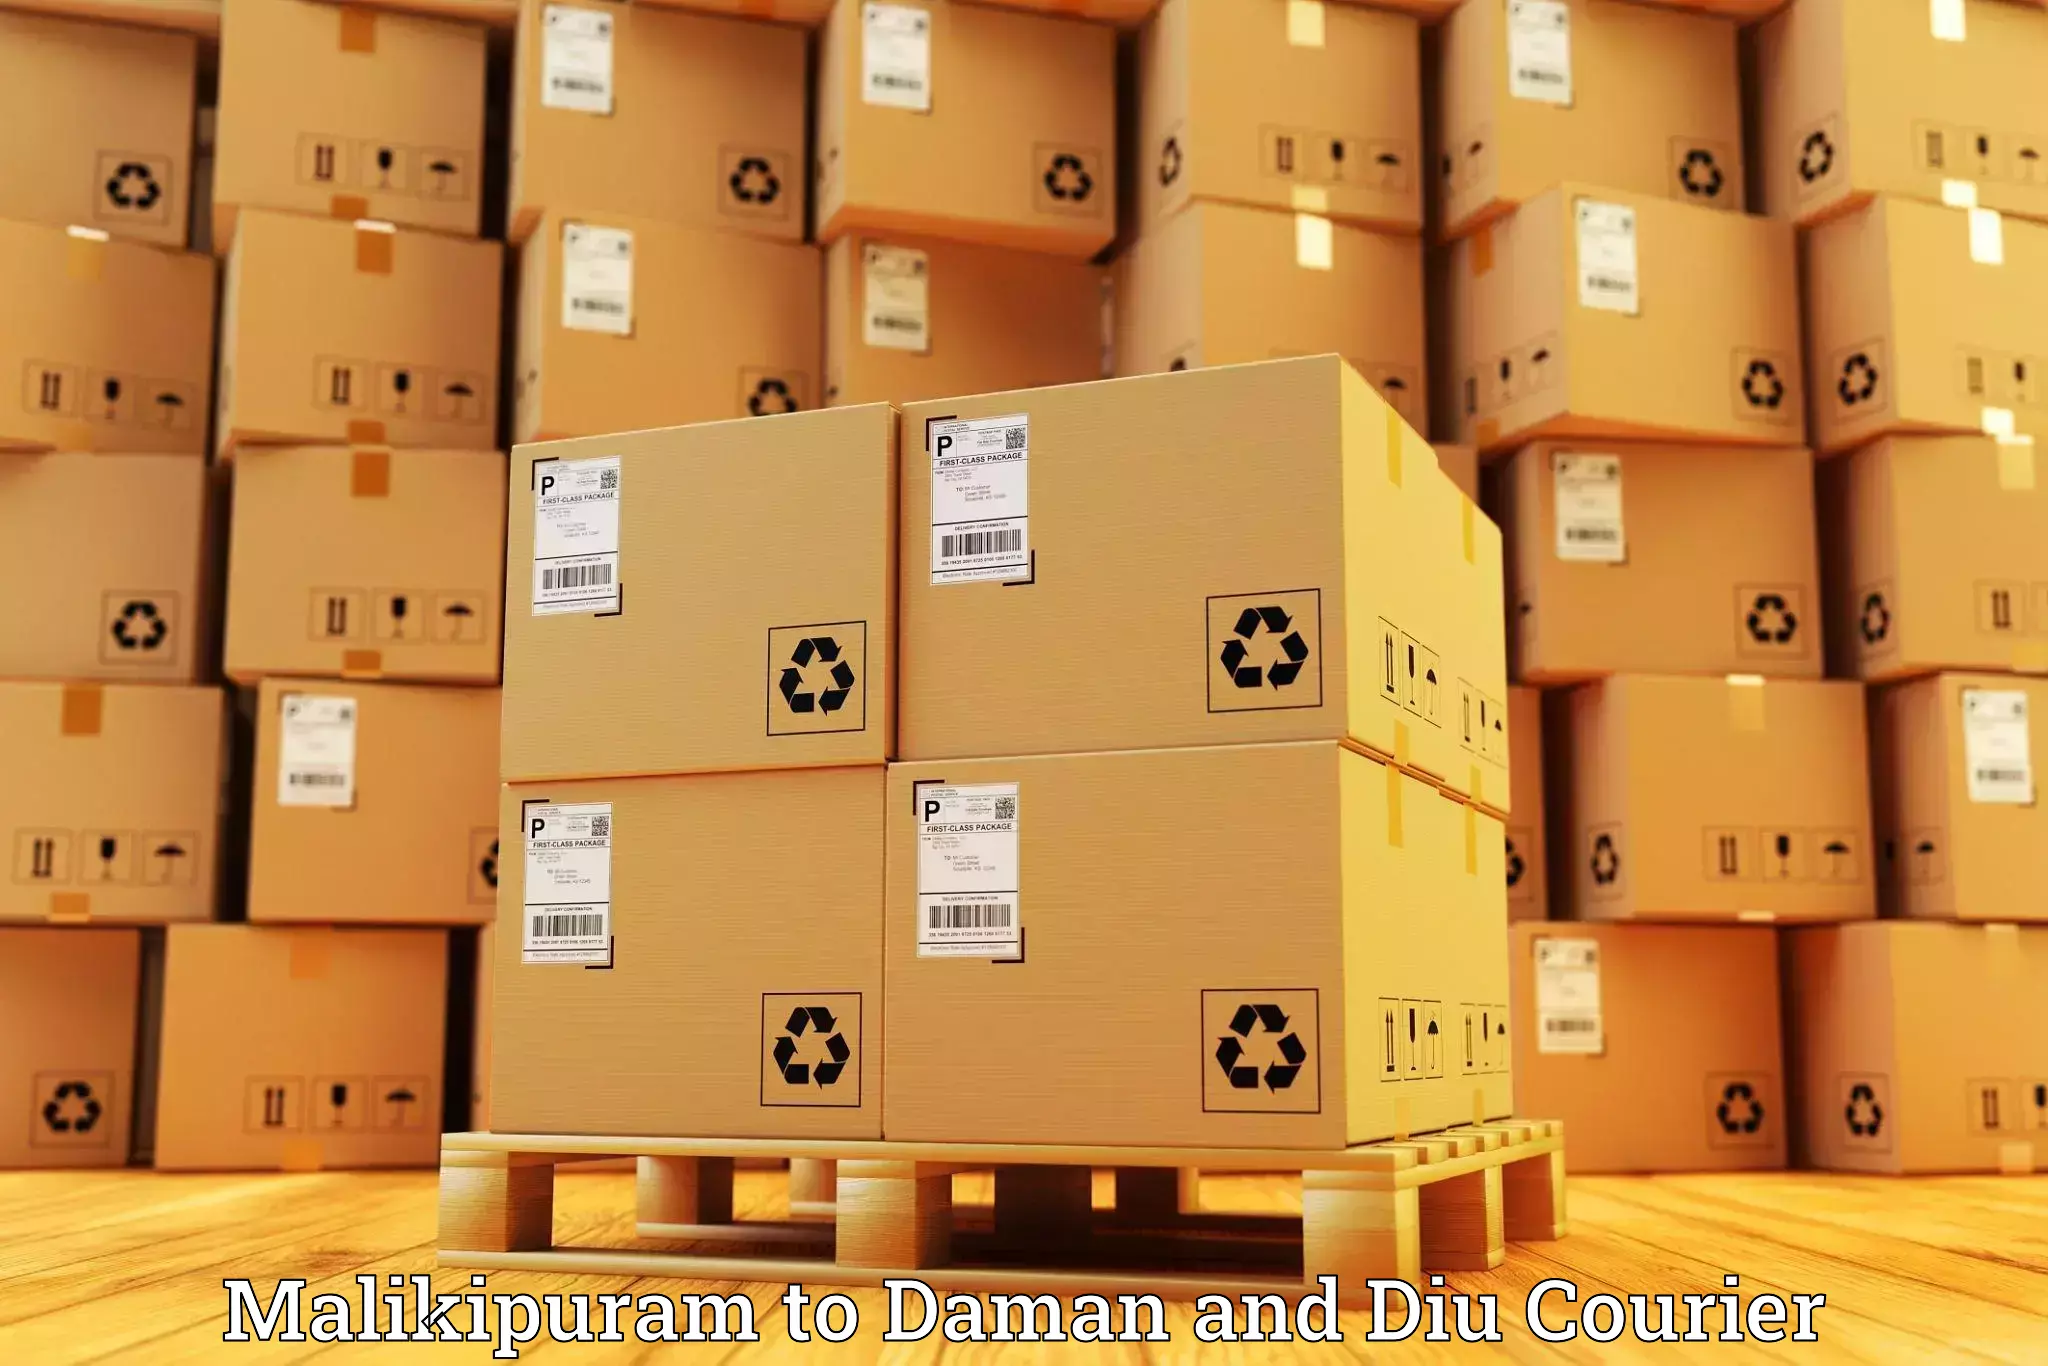 State-of-the-art courier technology in Malikipuram to Daman and Diu